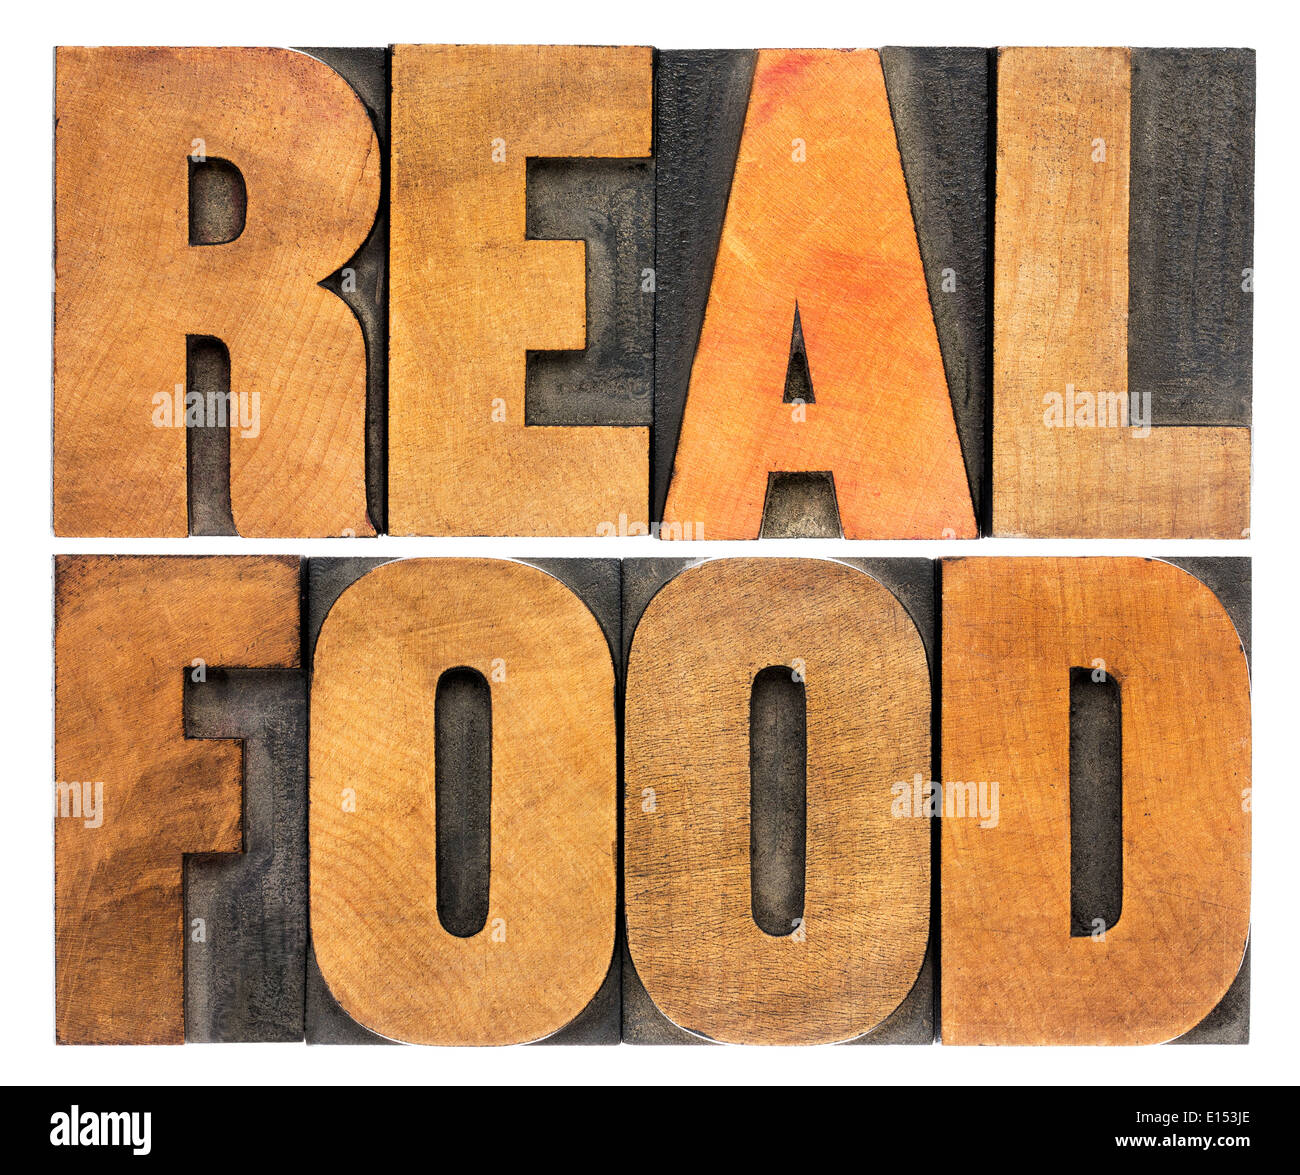 healthy lifestyle concept - real food, isolated text in vintage letterpress wood type Stock Photo